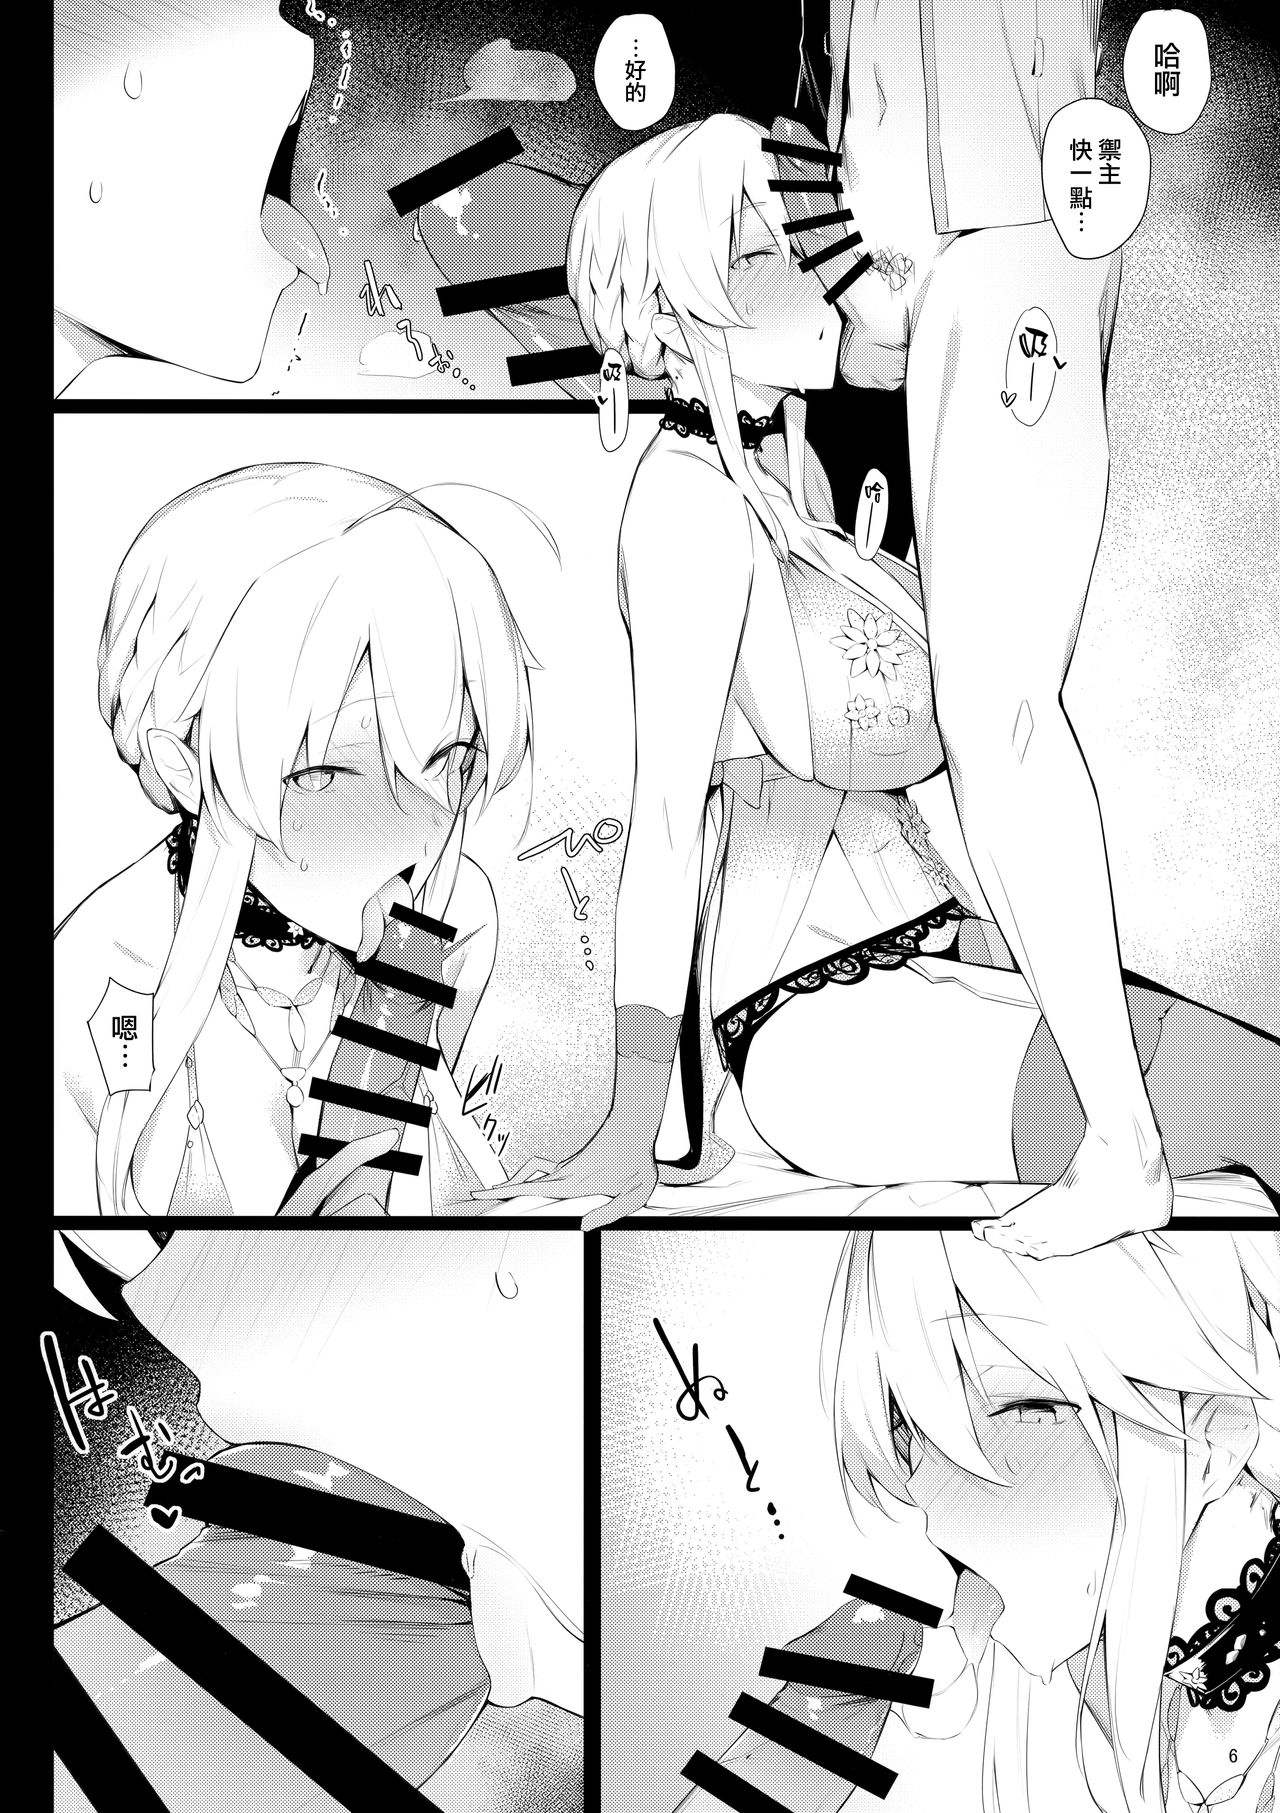 (C95) [Enokiya (eno)] Sultry Altria (Fate/Grand Order) [Chinese] [无毒汉化组] page 6 full